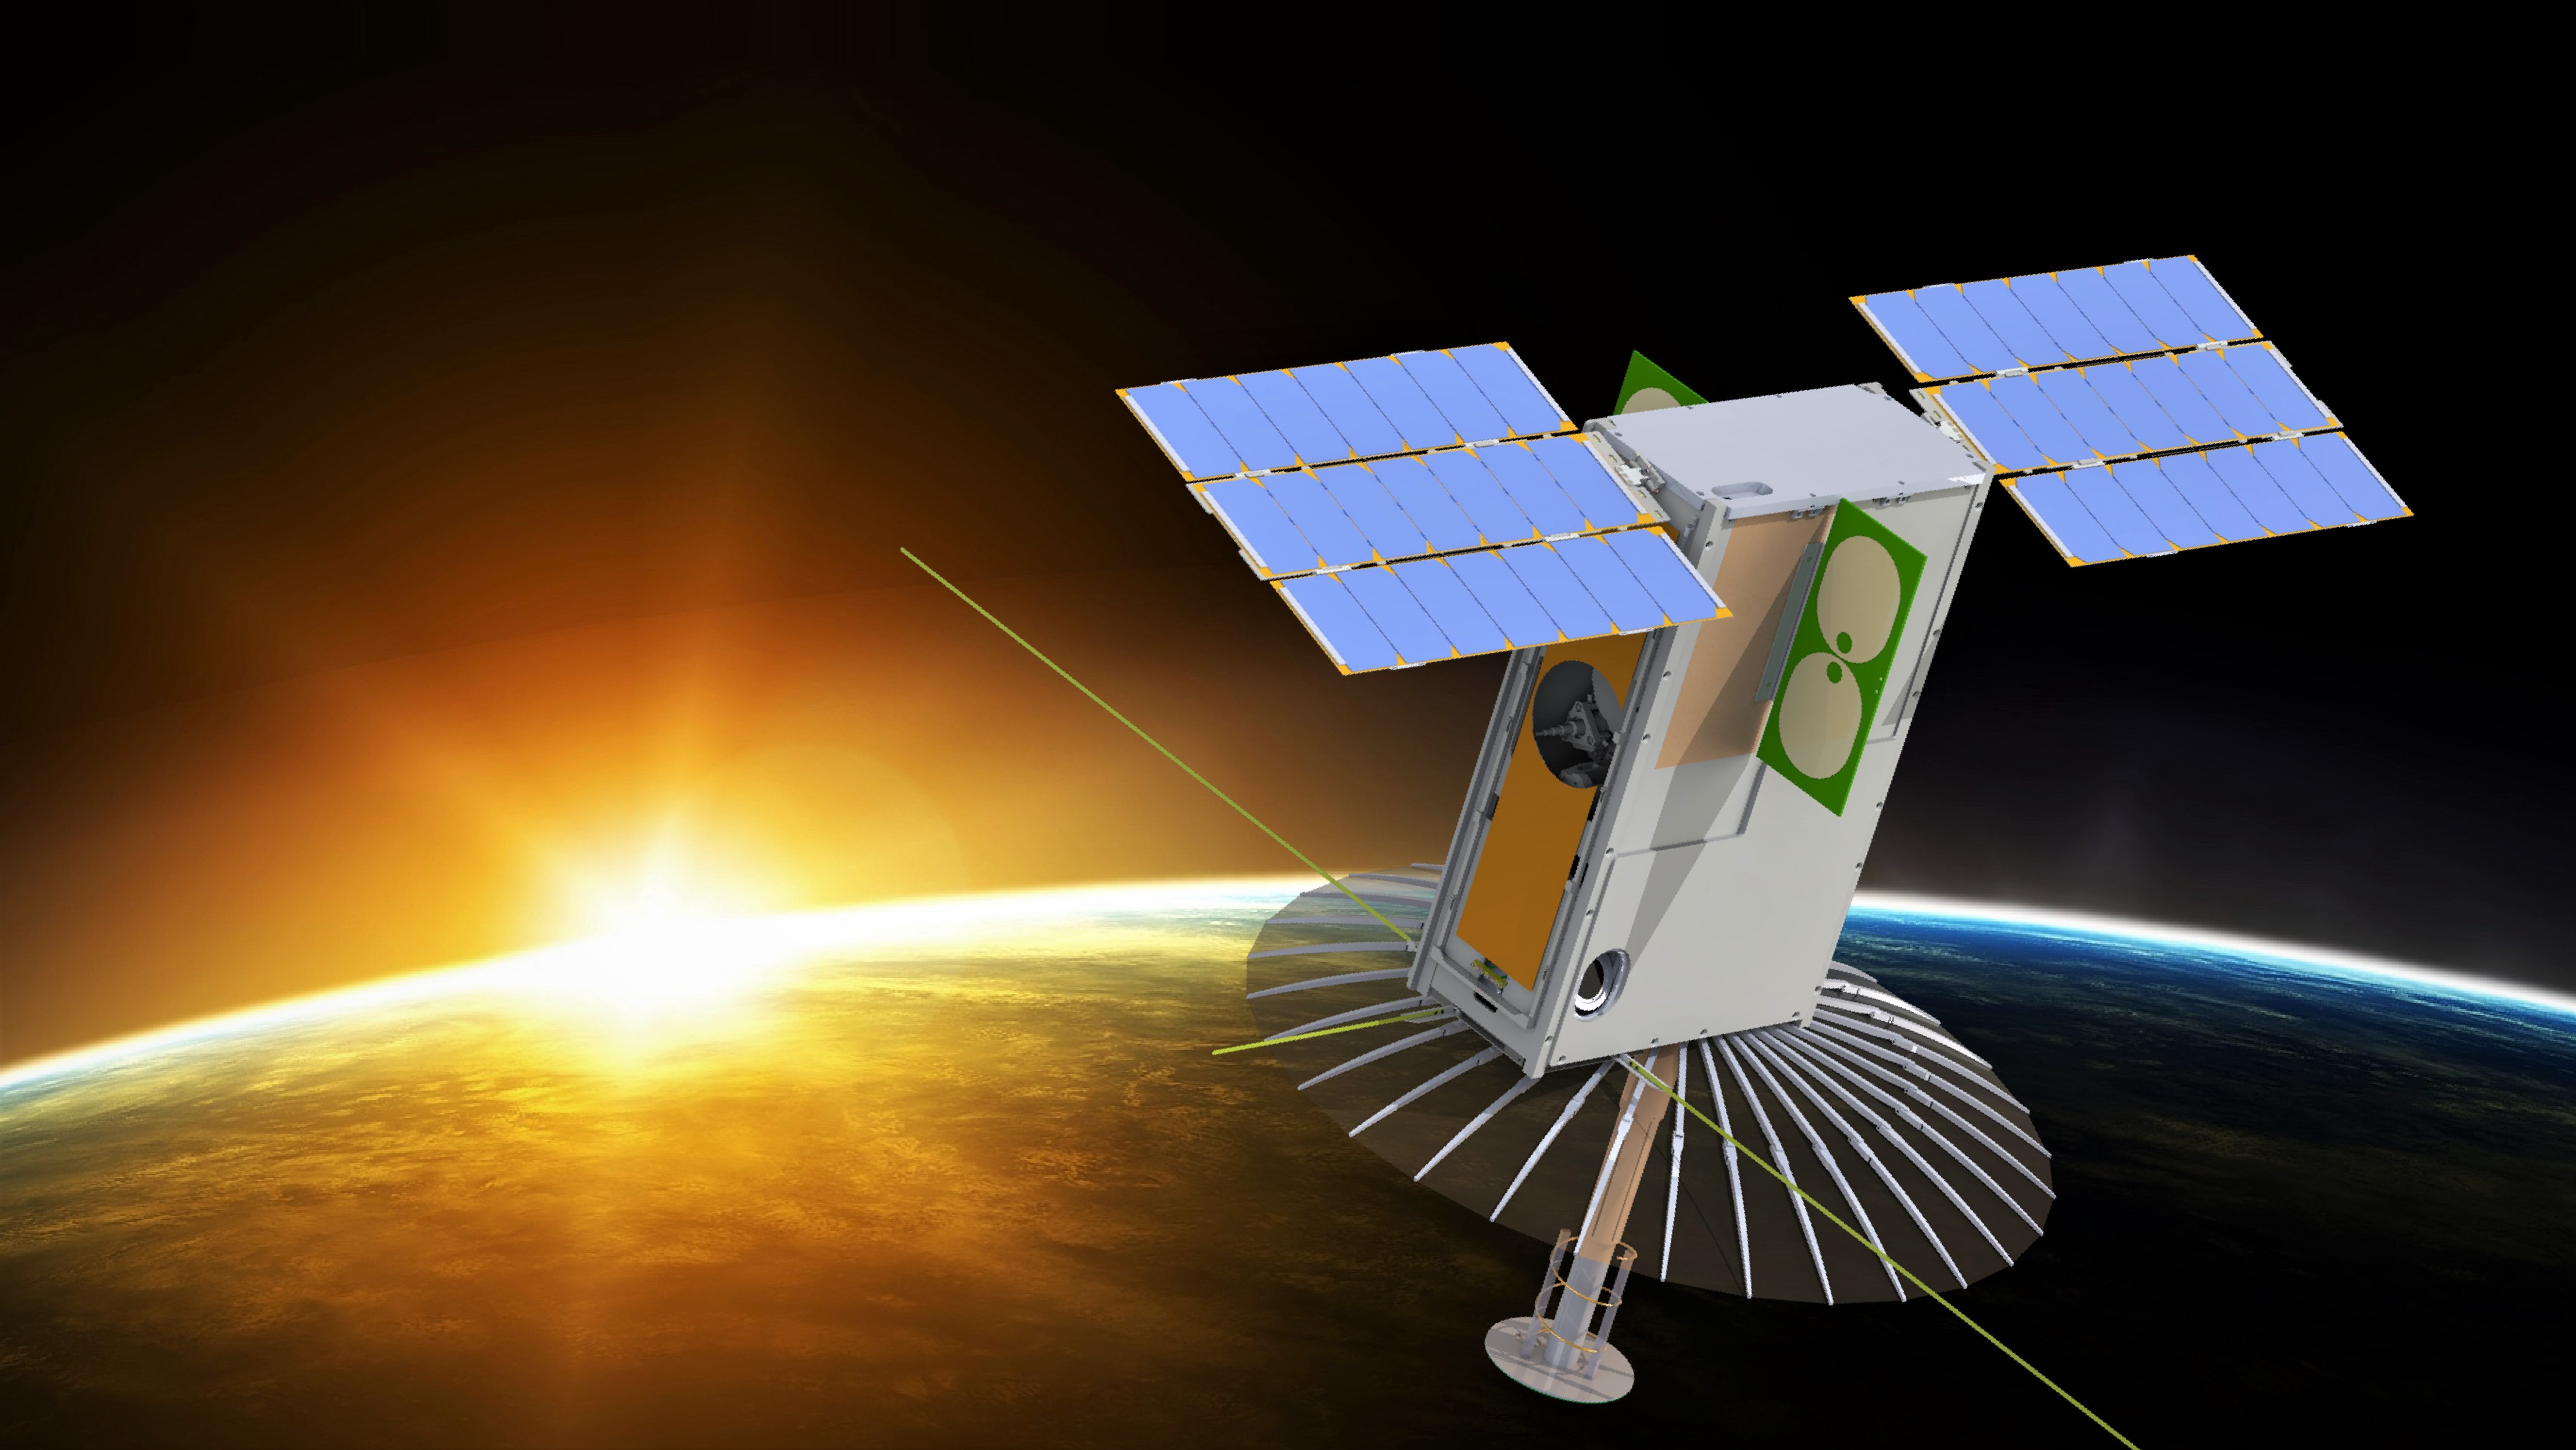 rendering of a test nanosatellite in space